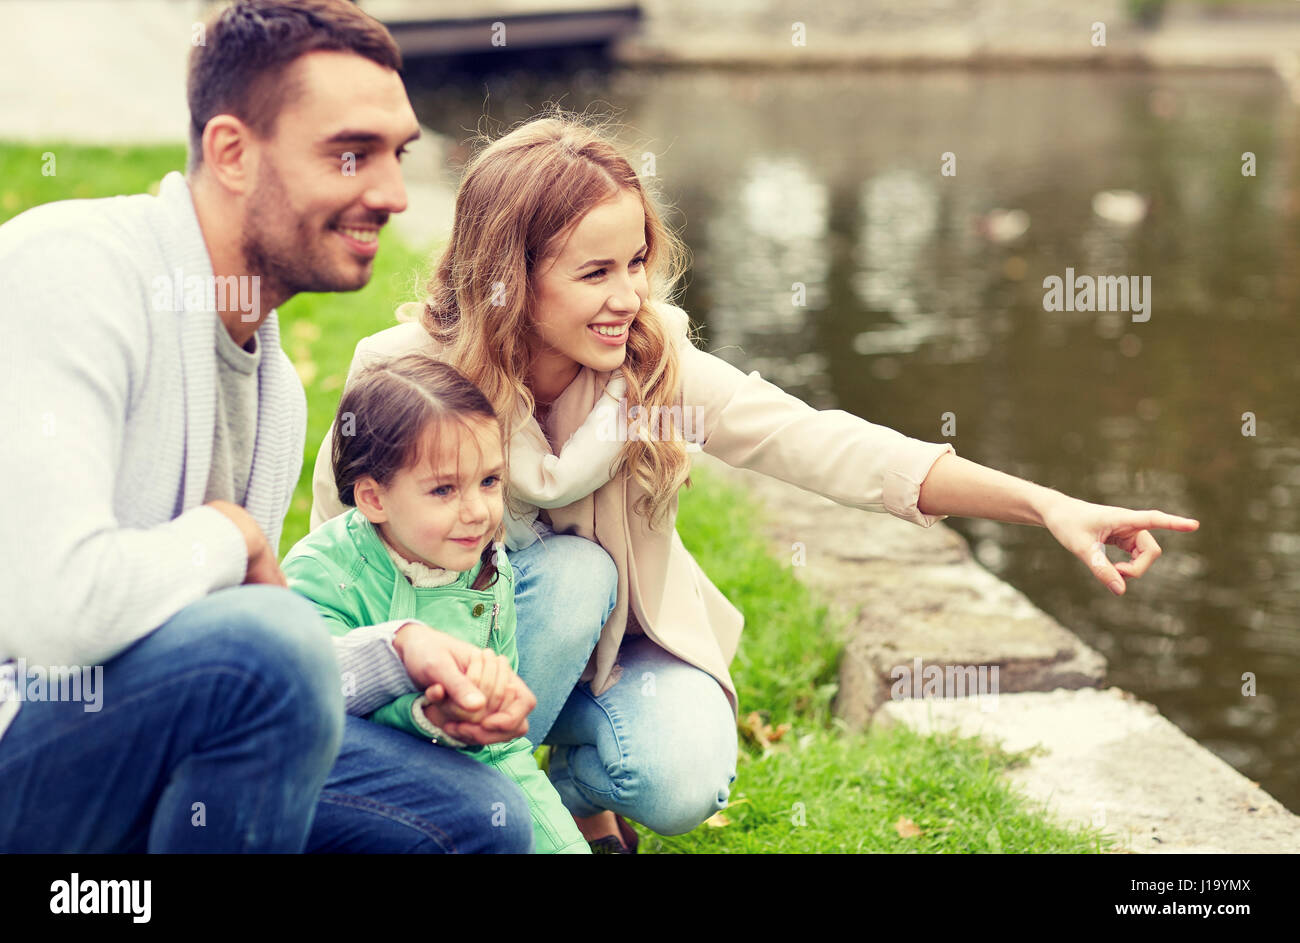 Happy Family walking in summer park Banque D'Images